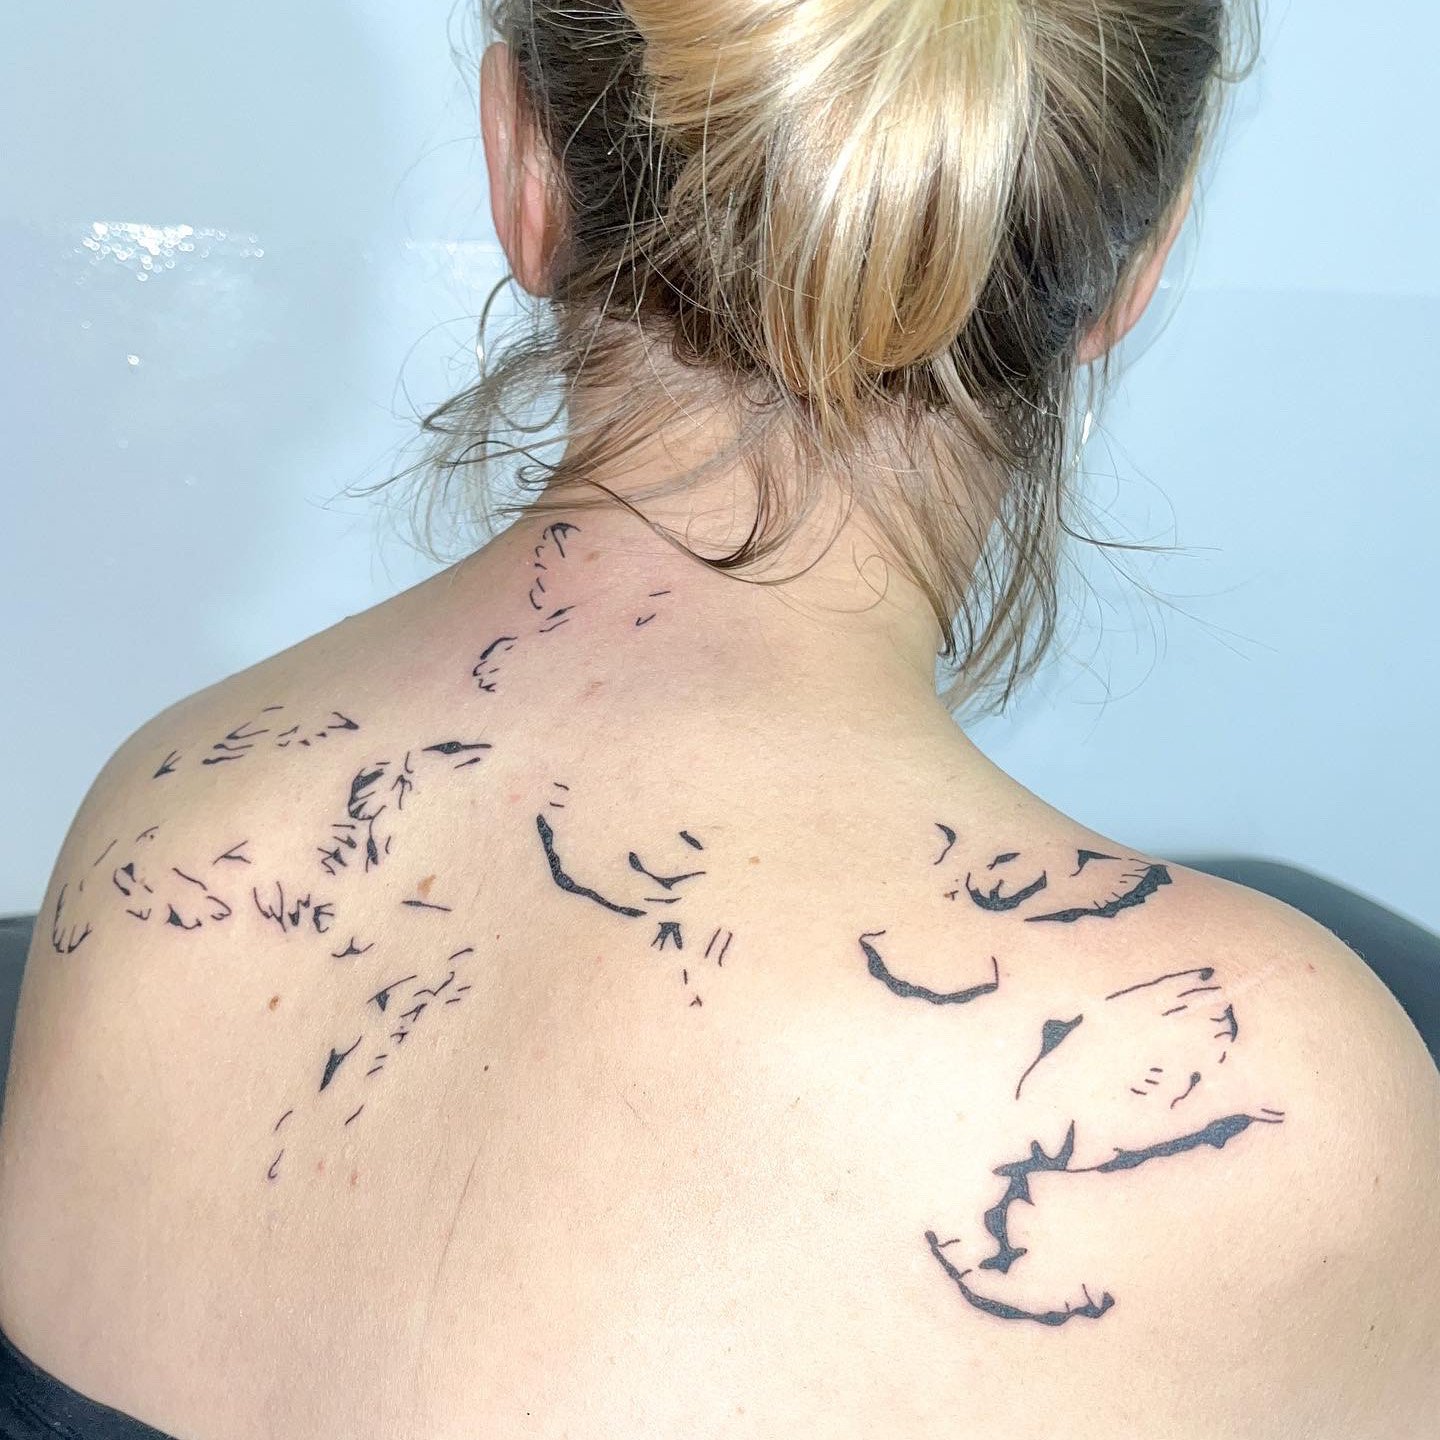 Upper back tattoo made with abstract shapes in black by ay_seed.jpg